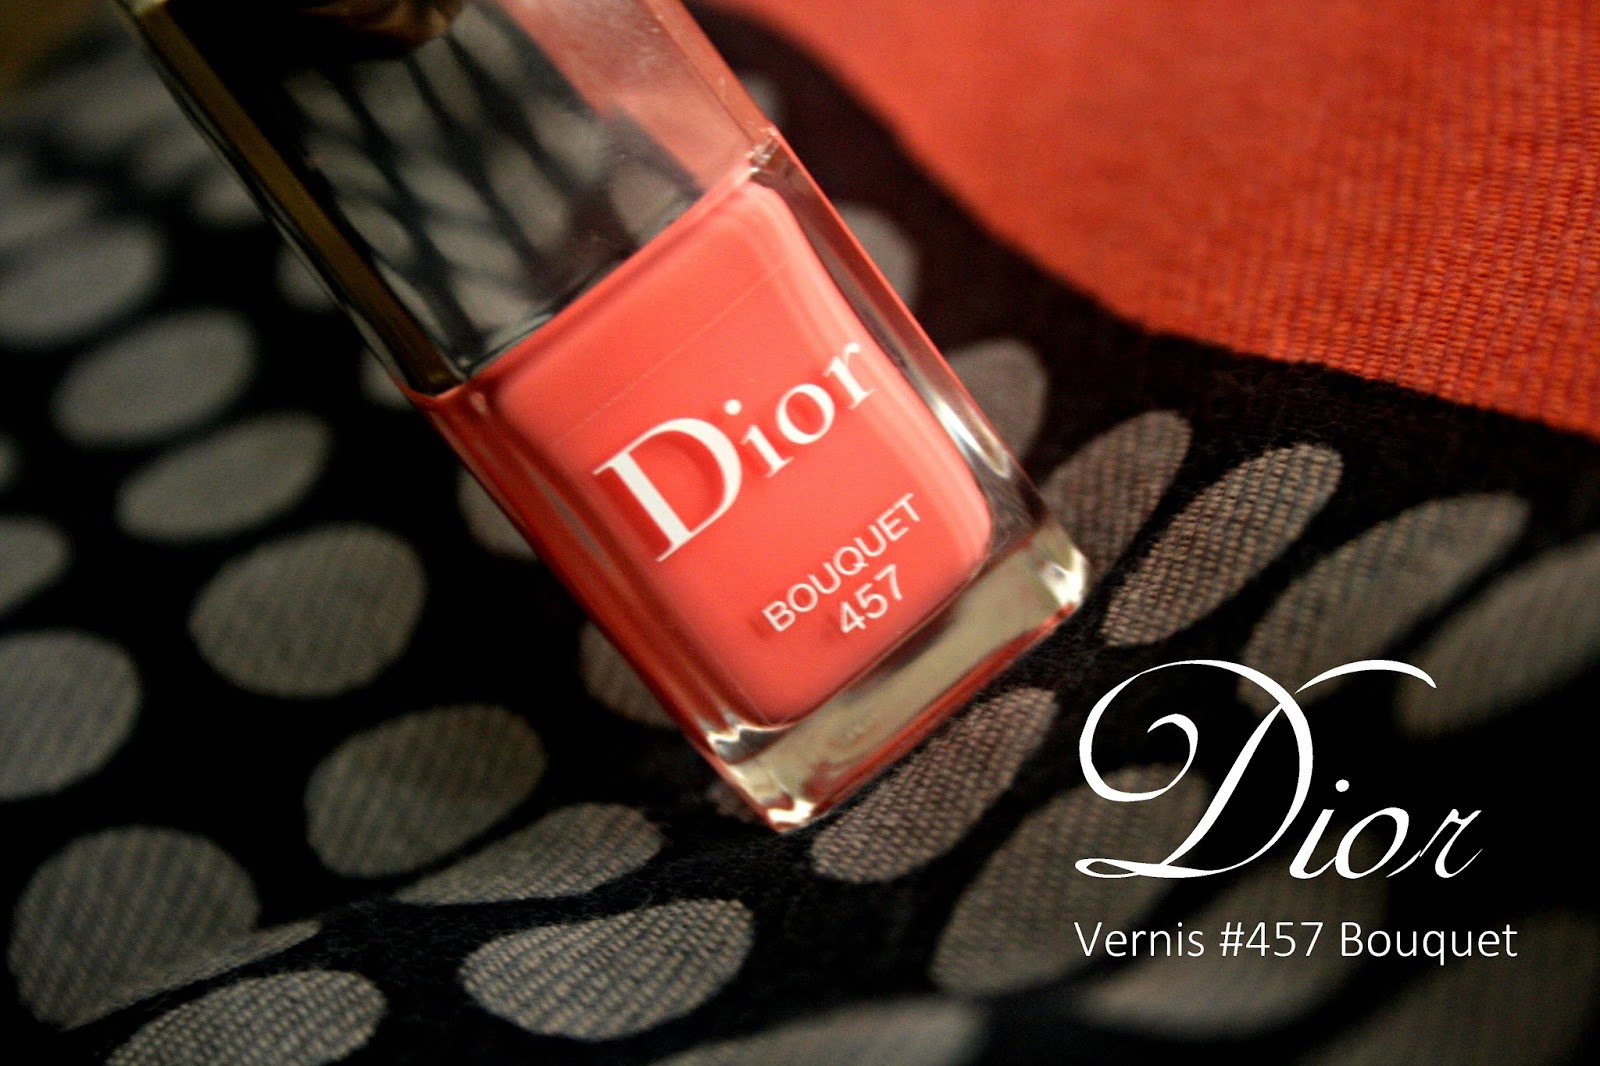 DIOR Vernis #457 Bouquet Trianon Spring 2014 Edition Review, Photos & Swatches